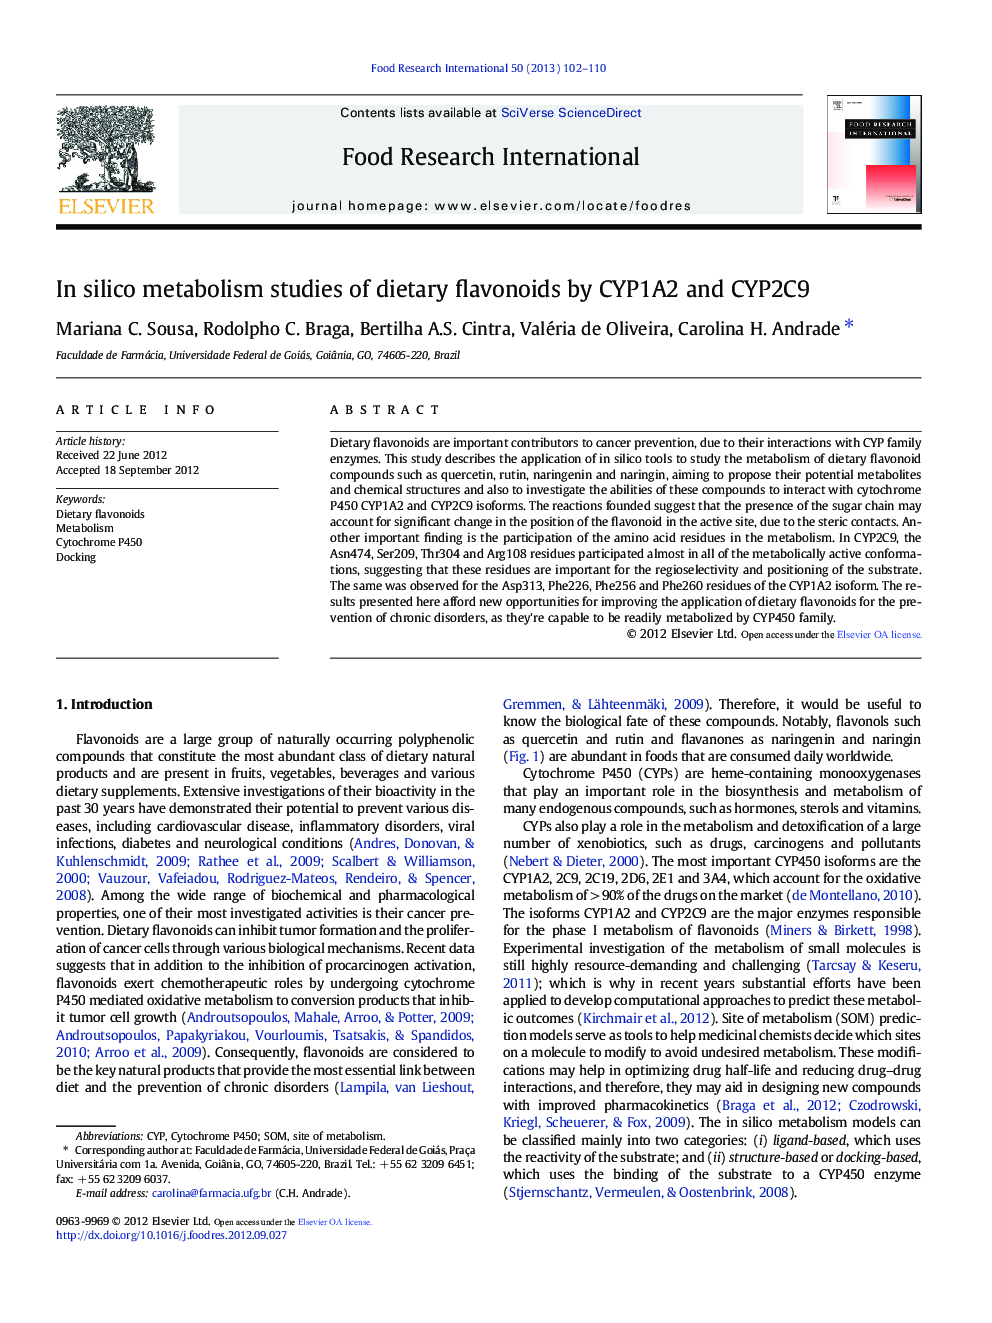 In silico metabolism studies of dietary flavonoids by CYP1A2 and CYP2C9